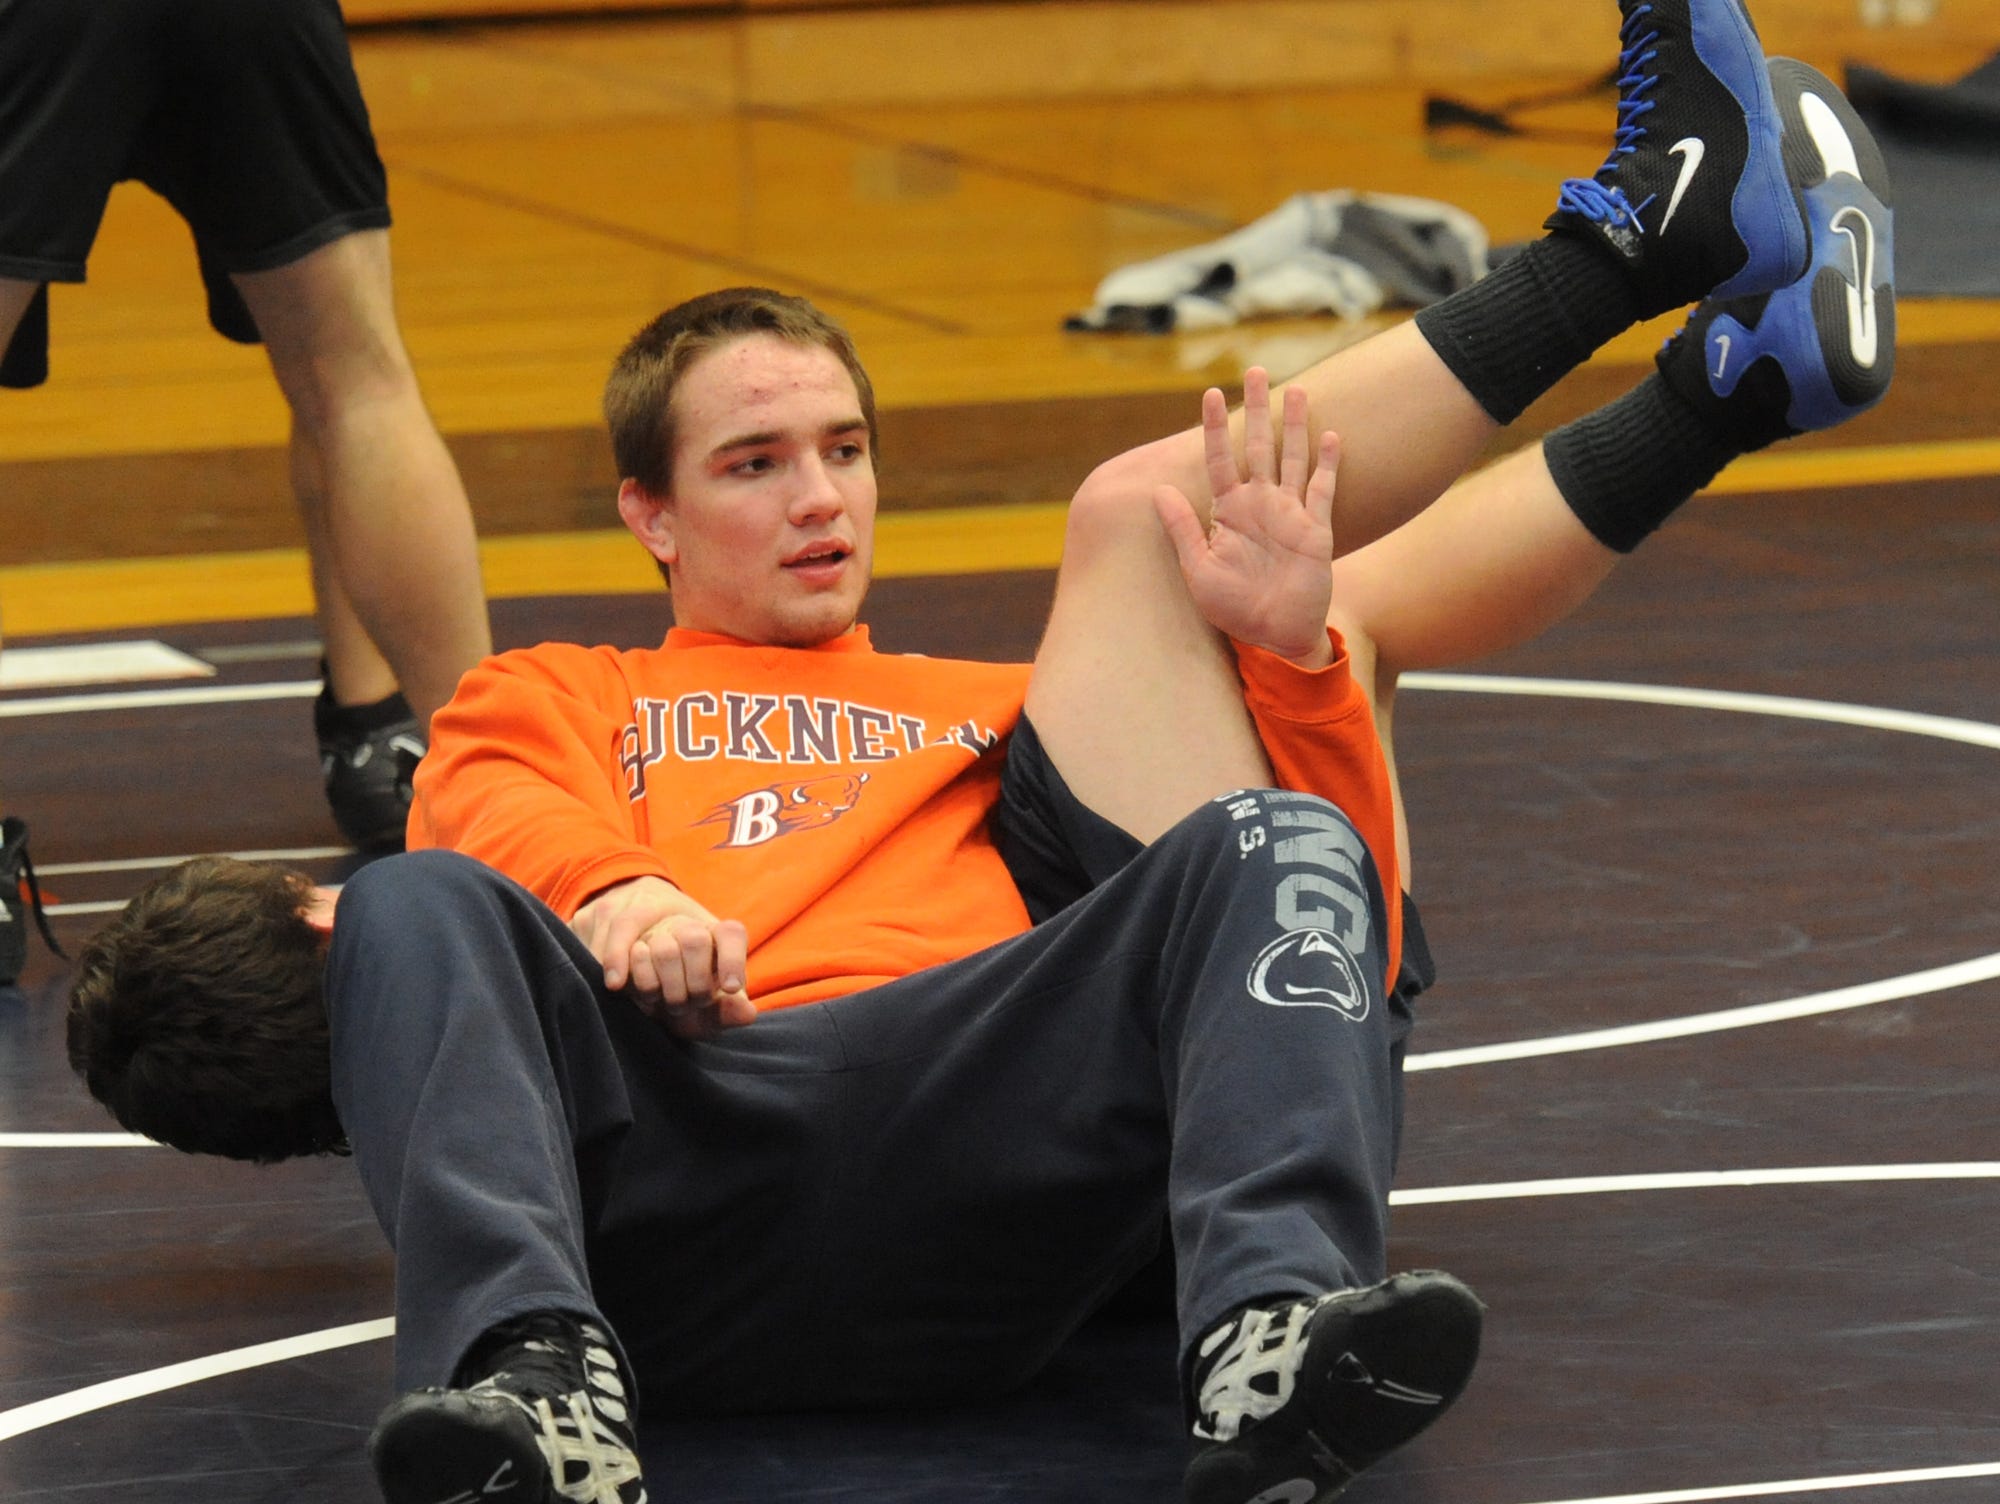 Enka alum Kacee Hutchinson was named the Citizen-Times All-WNC Wrestler of the Year in 2012 and 2013.